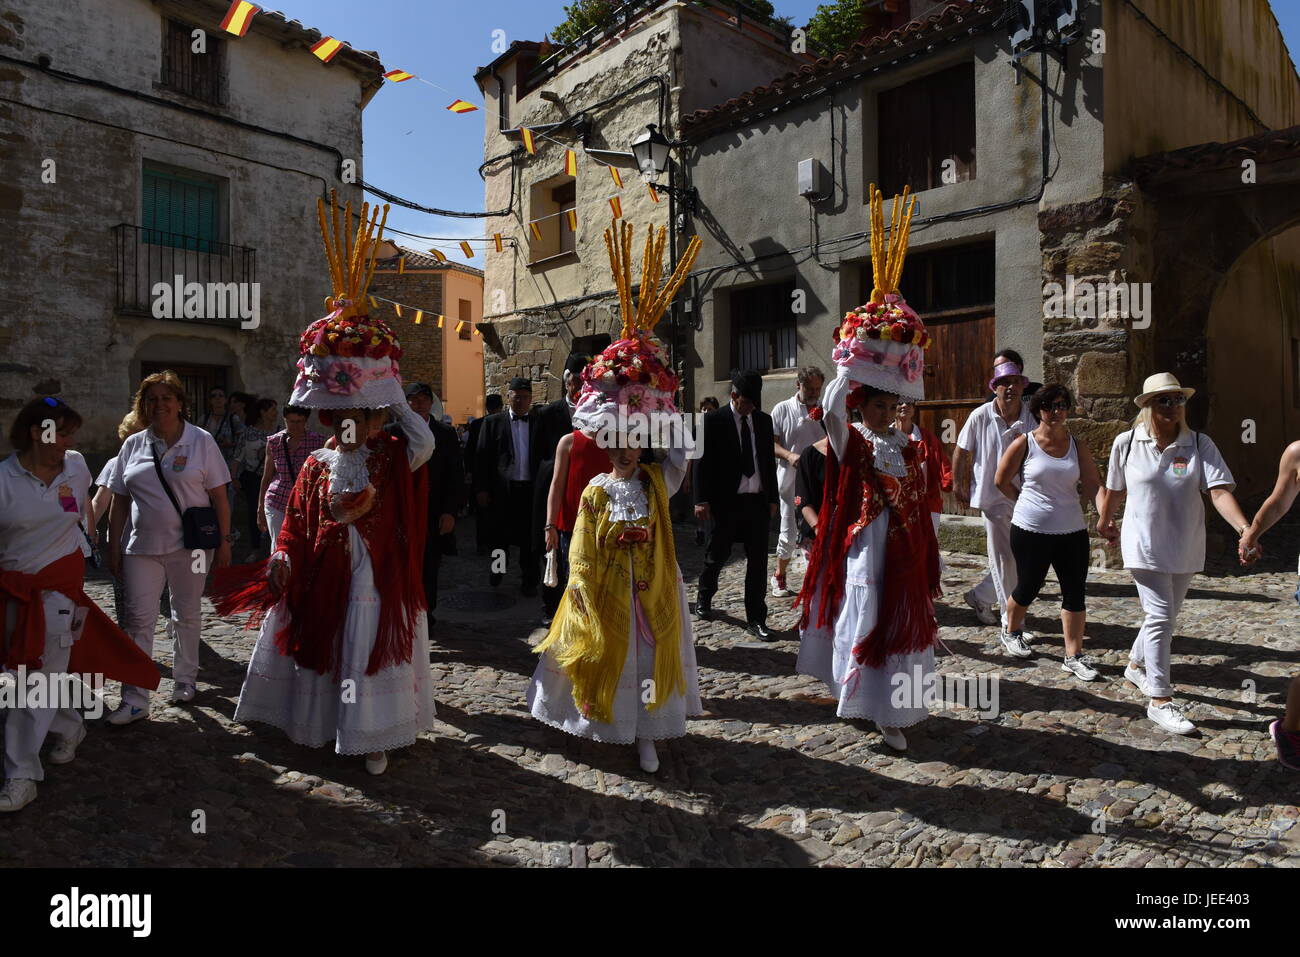 San Pedro Manrique, Spain. 24th June, 2017. A group of women called 'Móndidas' dressed in traditional costumes and wearing huge 'Cestaños', hats decorated with flowers and branches, covered with unleavened bread and colored with saffron, pictured during the celebration of the ancient tradition of 'La Descubierta' in San Pedro Manrique, northern Spain. Credit: Jorge Sanz/Pacific Press/Alamy Live News Stock Photo